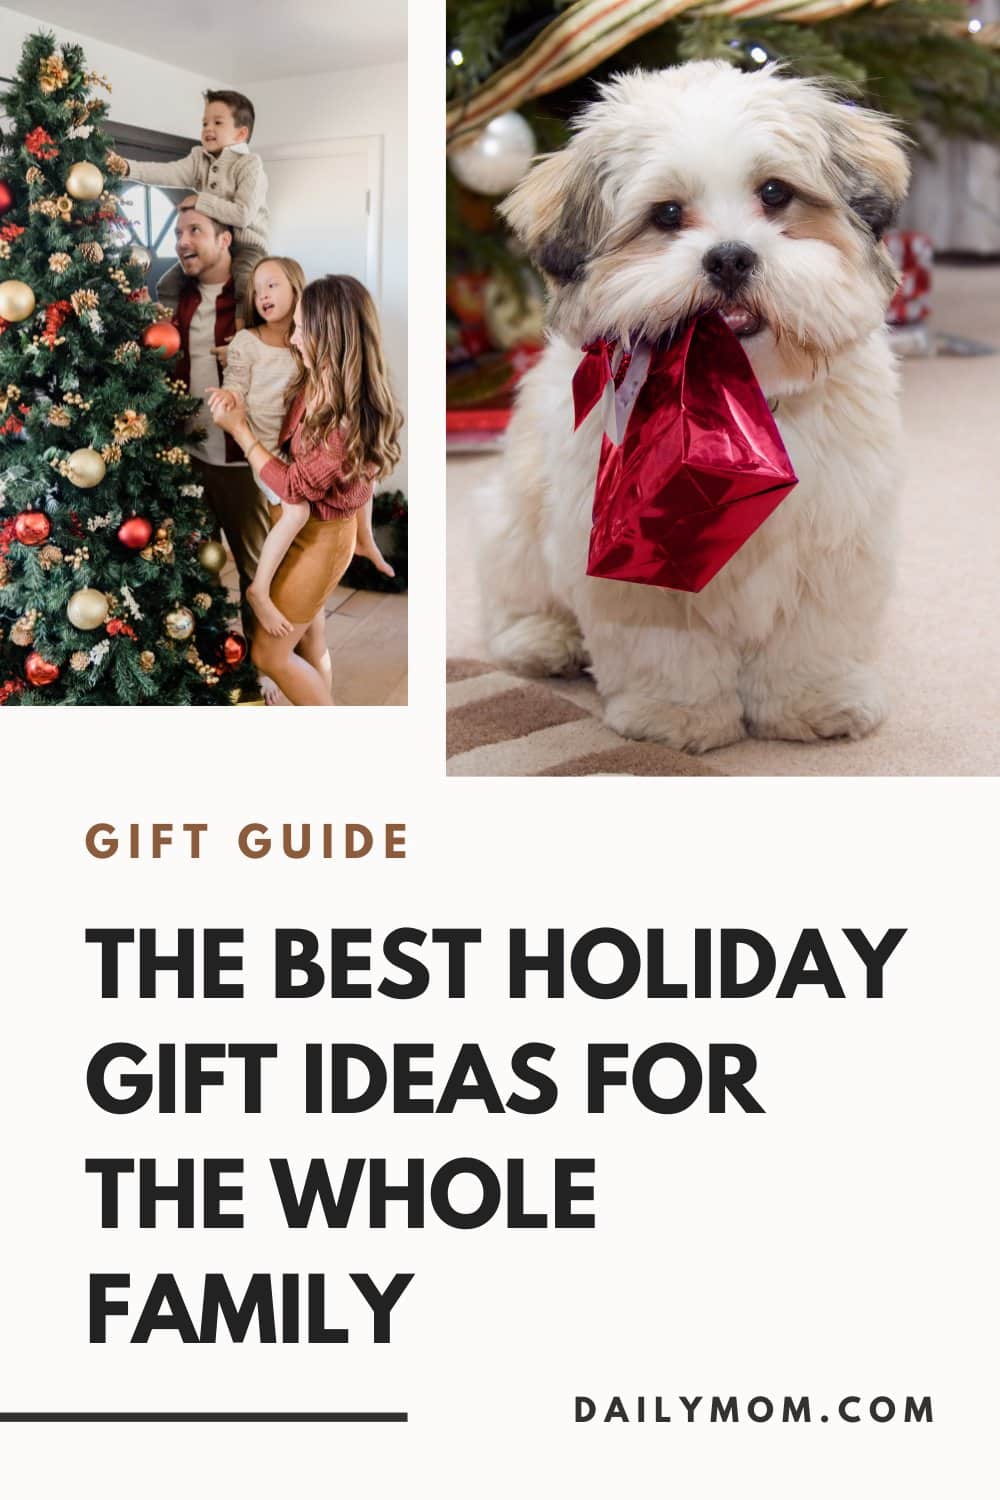 31 Easy Holiday Gift Ideas For The Whole Family 82 Daily Mom, Magazine For Families